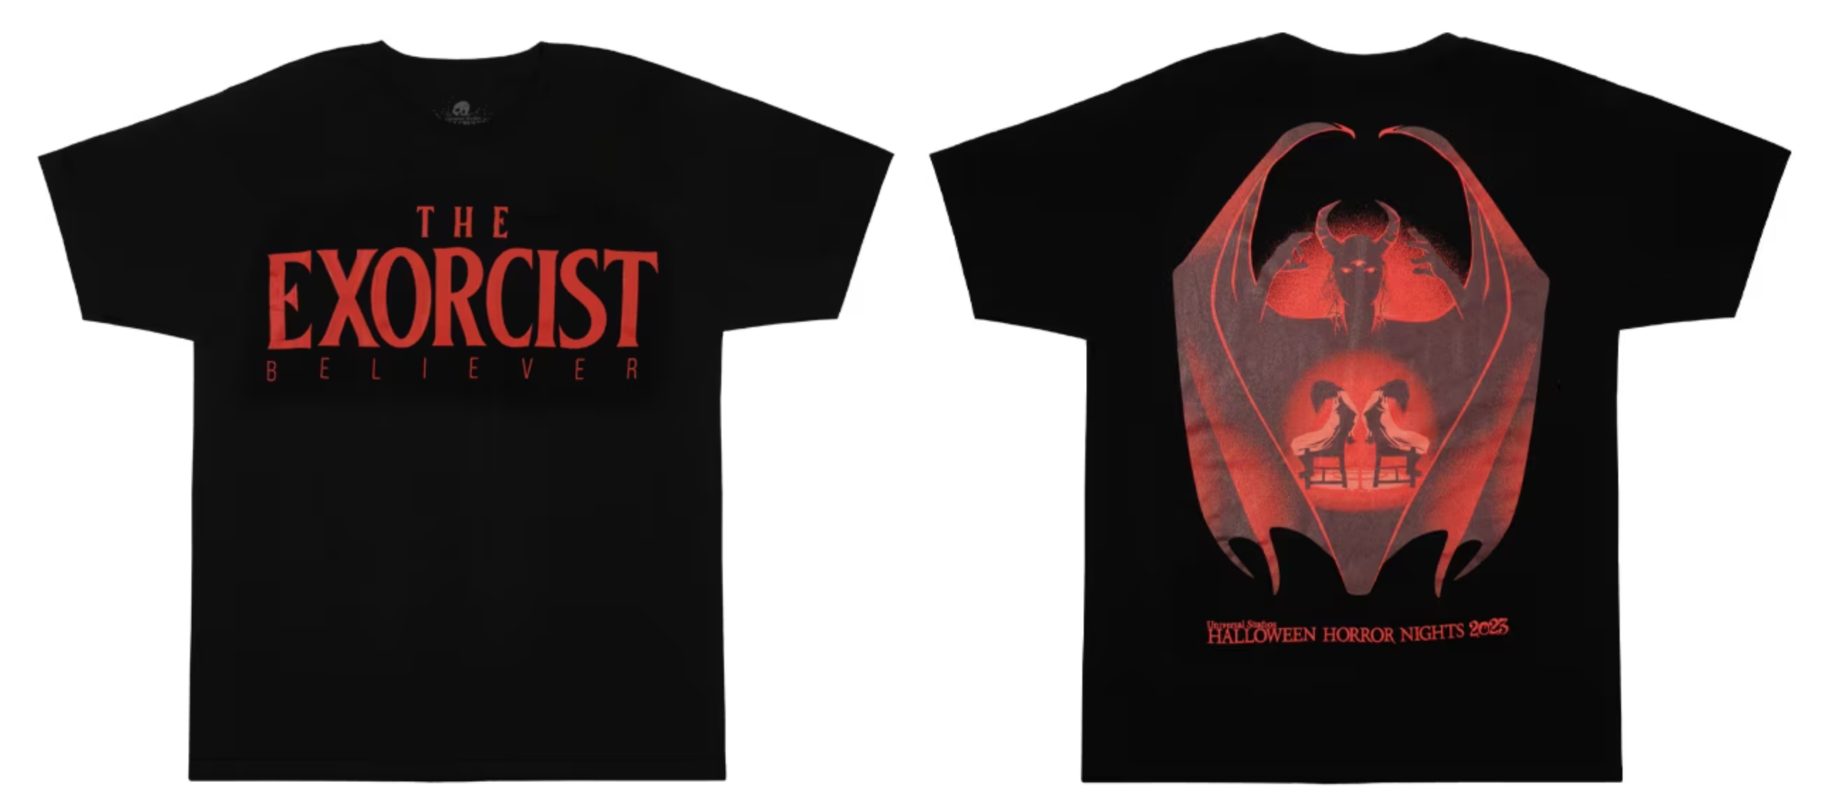 the-exorcist-believer-shirt-HHN-23.png